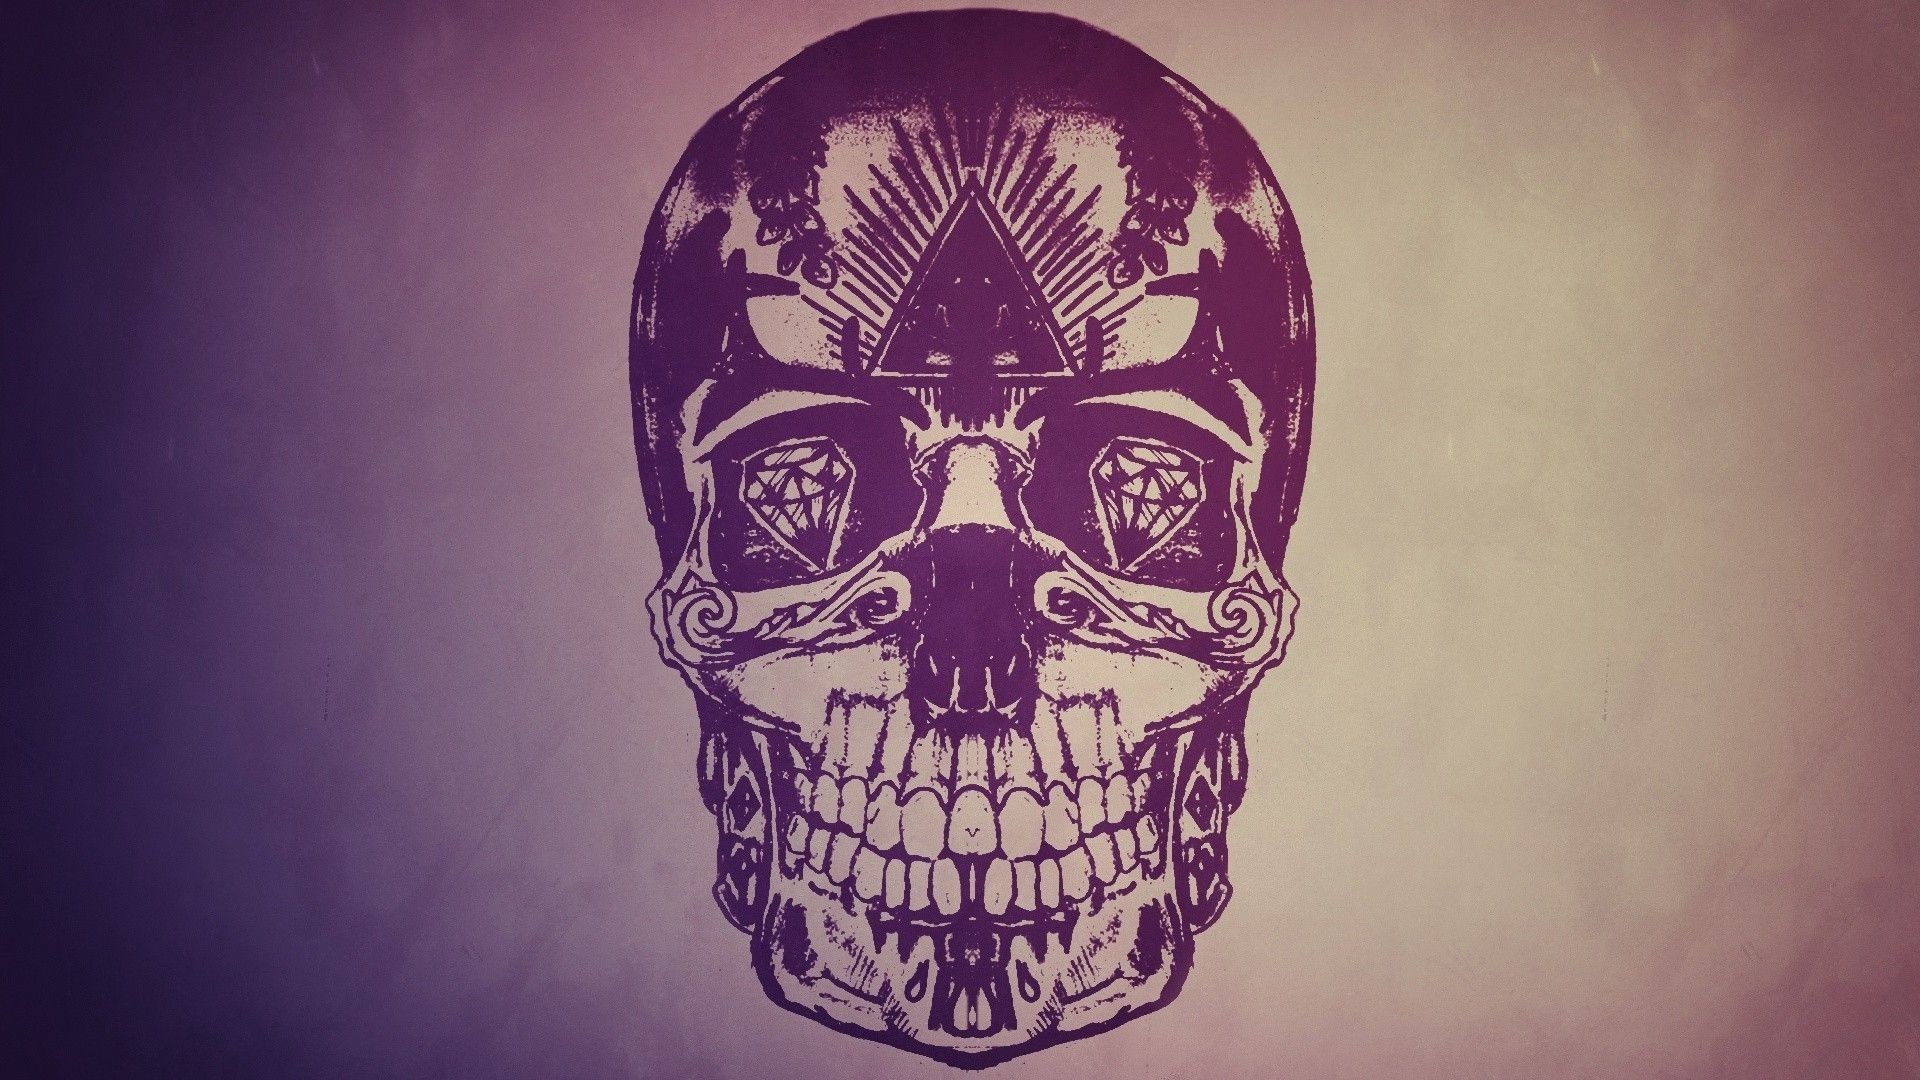 1920x1080 0 Skull Wallpaper Hd Collection Skull Wallpapers  Group